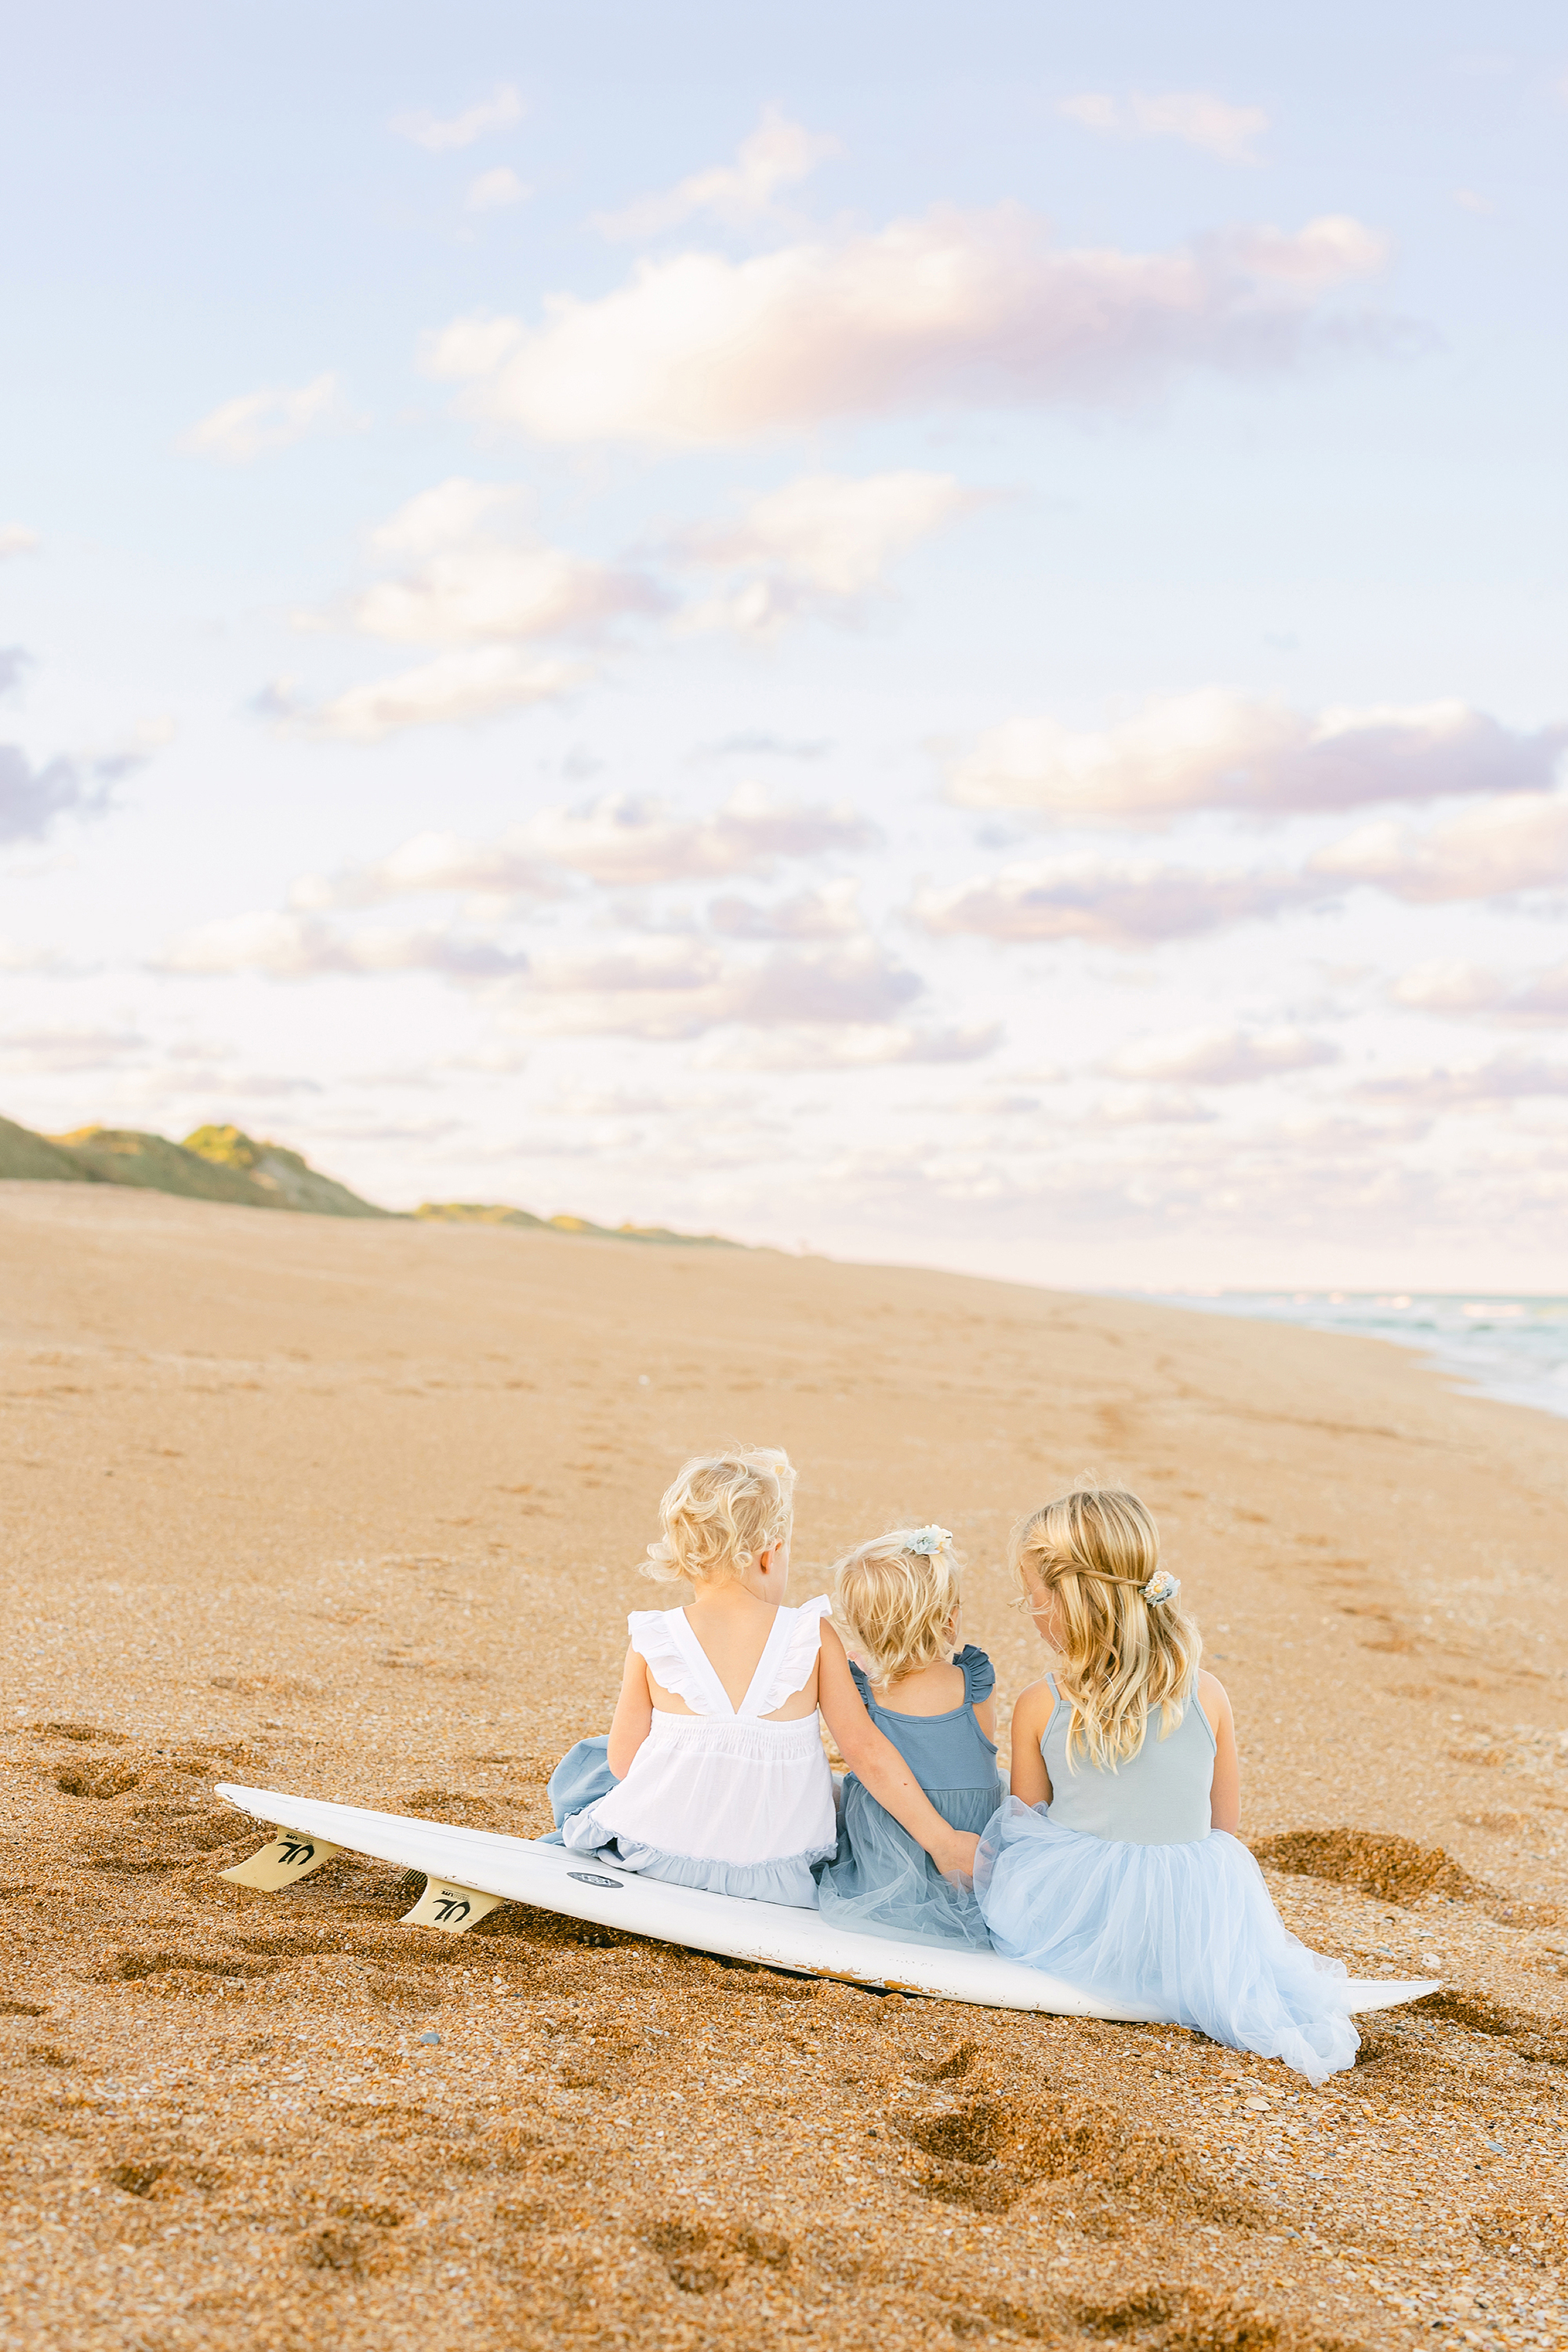 Three little girls in blue and white dresses sitting on a surfboard on the beach at sunset.